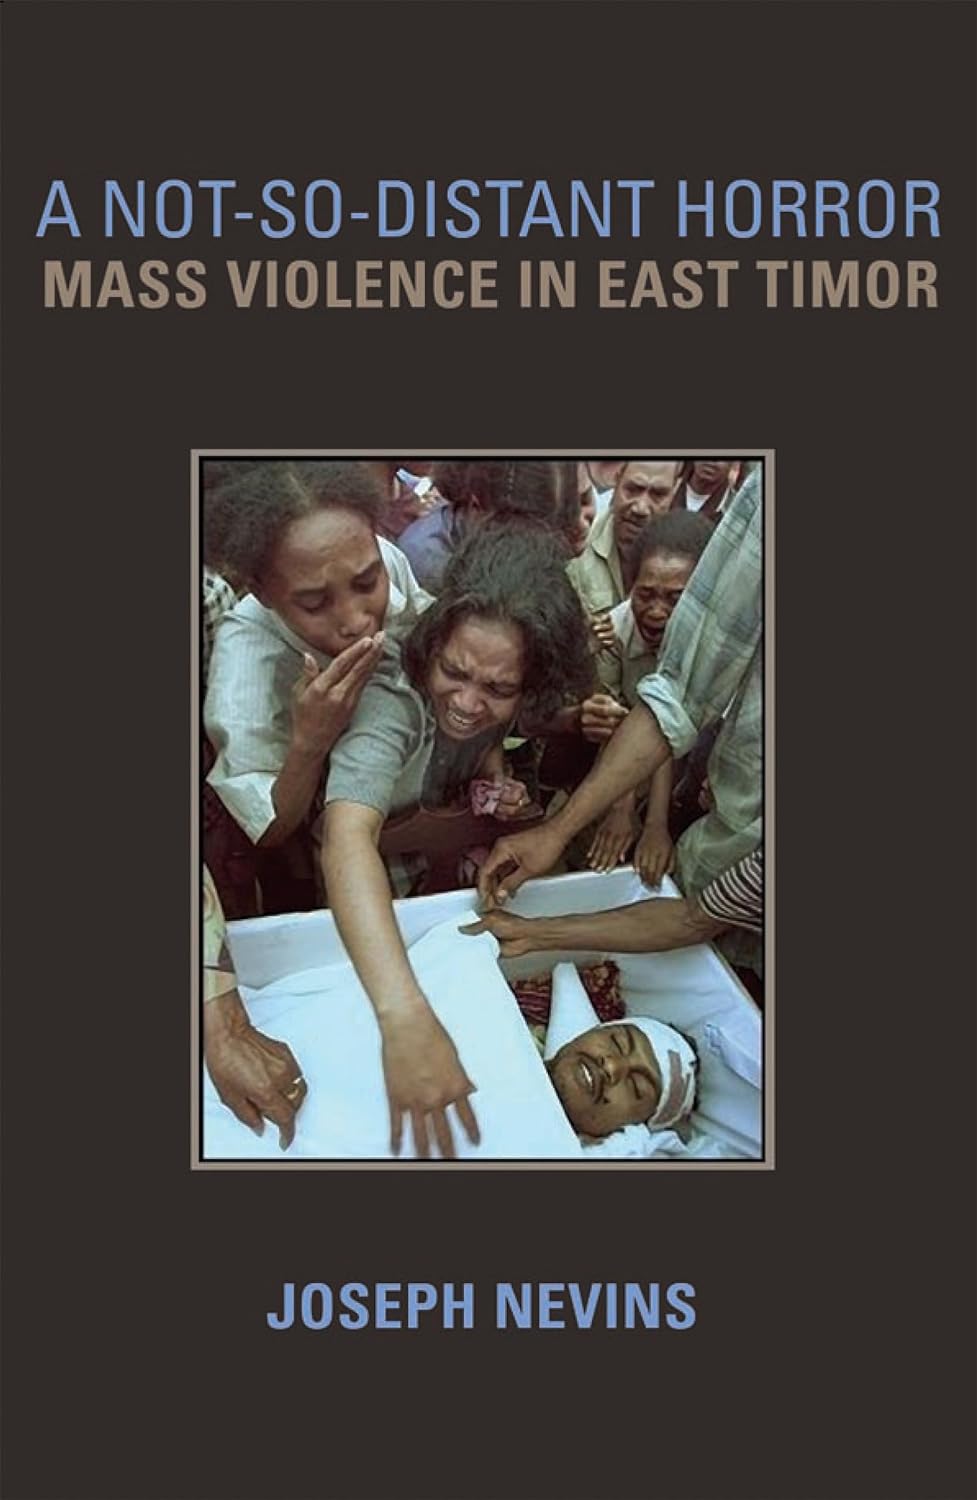 A Not-So-Distant Horror: Mass violence in East Timor